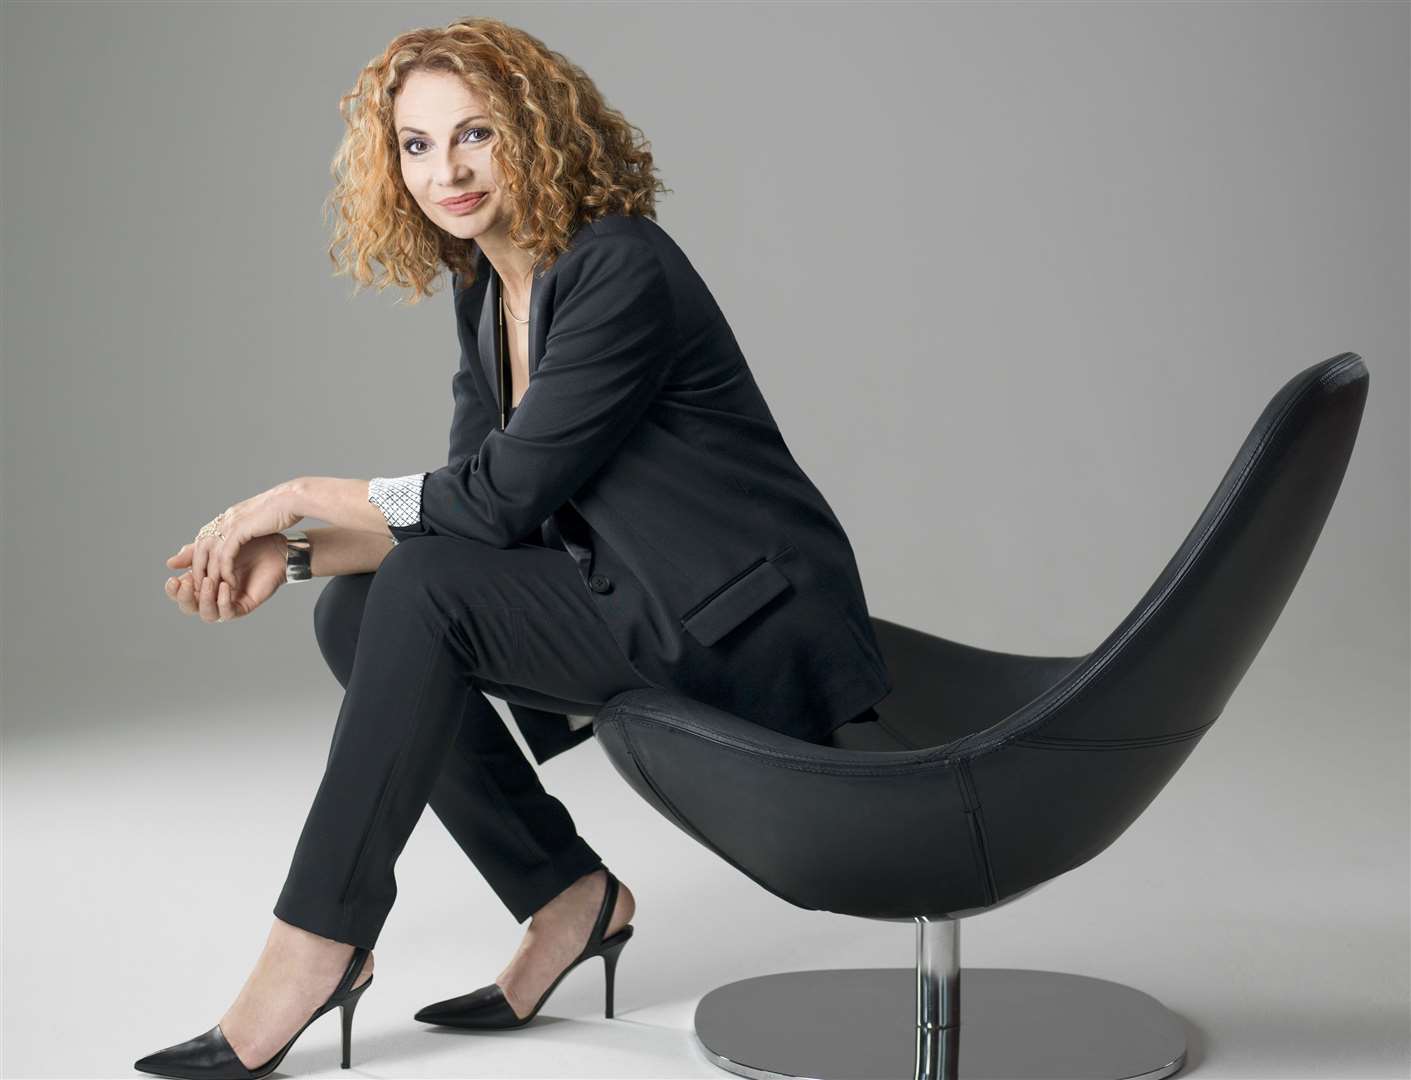 Pianist Joanna MacGregor will perform at the Canterbury Festival